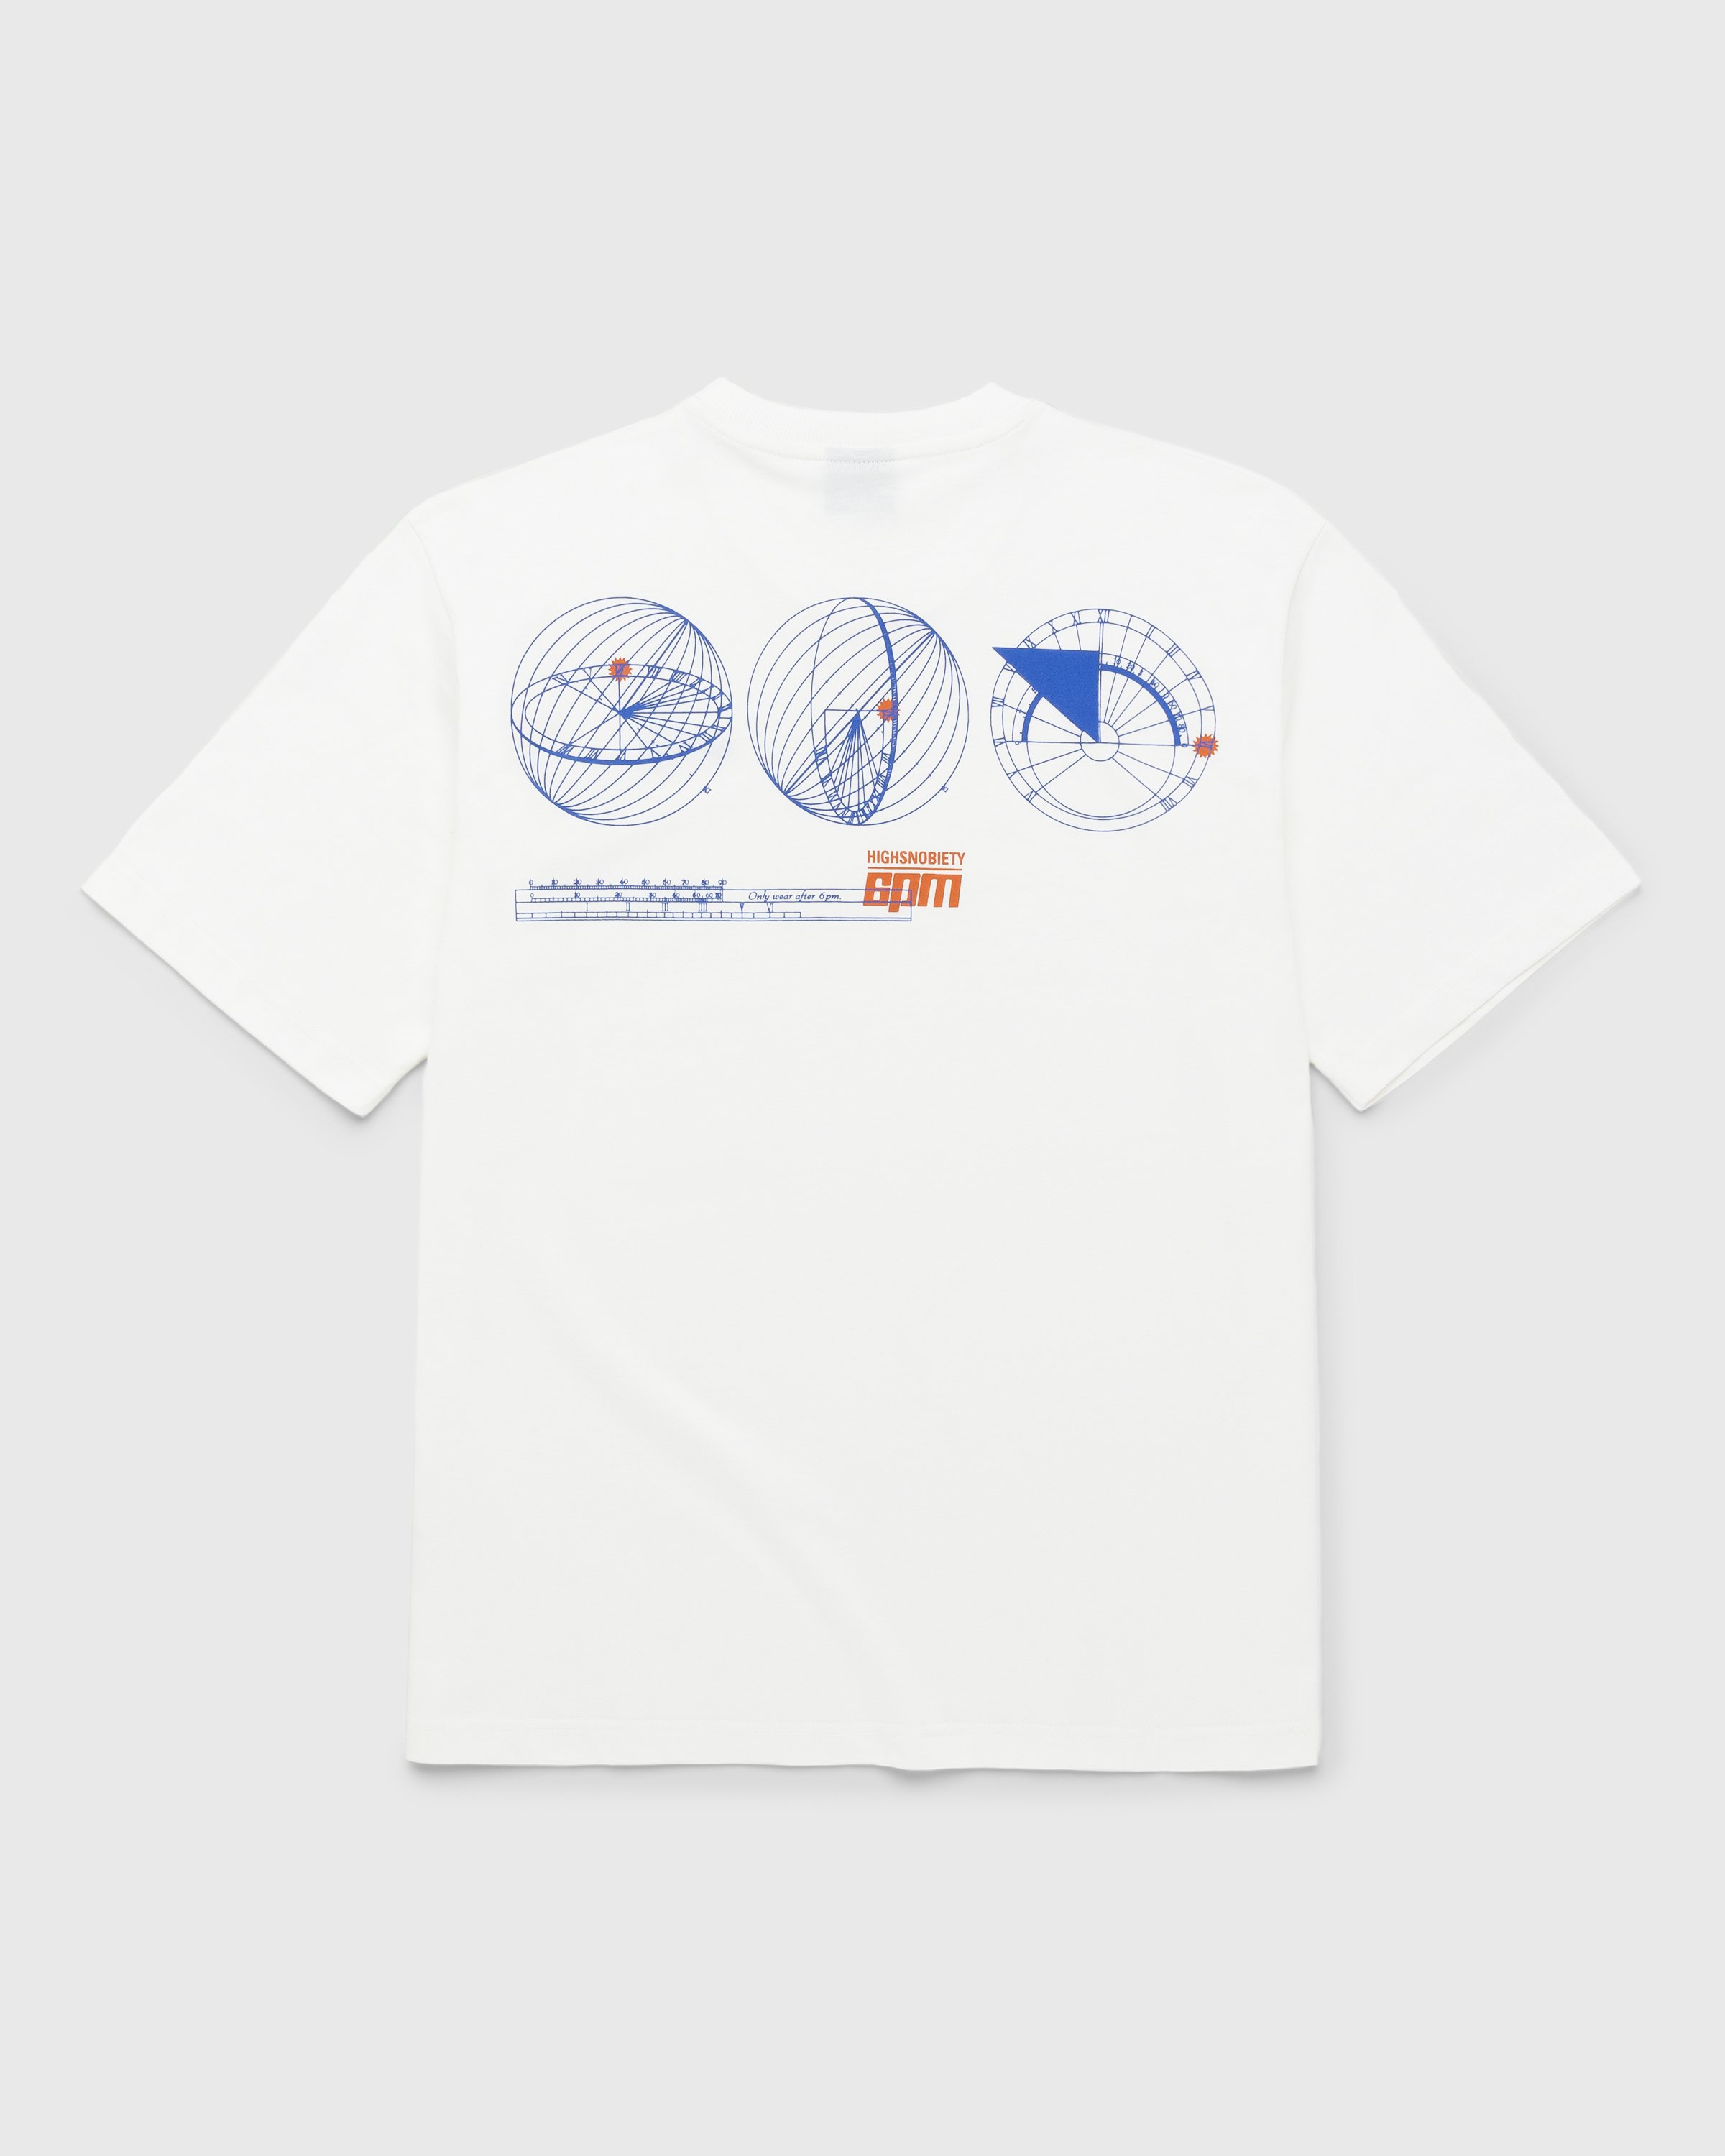 6PM x Highsnobiety - BERLIN, BERLIN 3 Only Wear After 6PM T-Shirt White - Clothing - White - Image 1